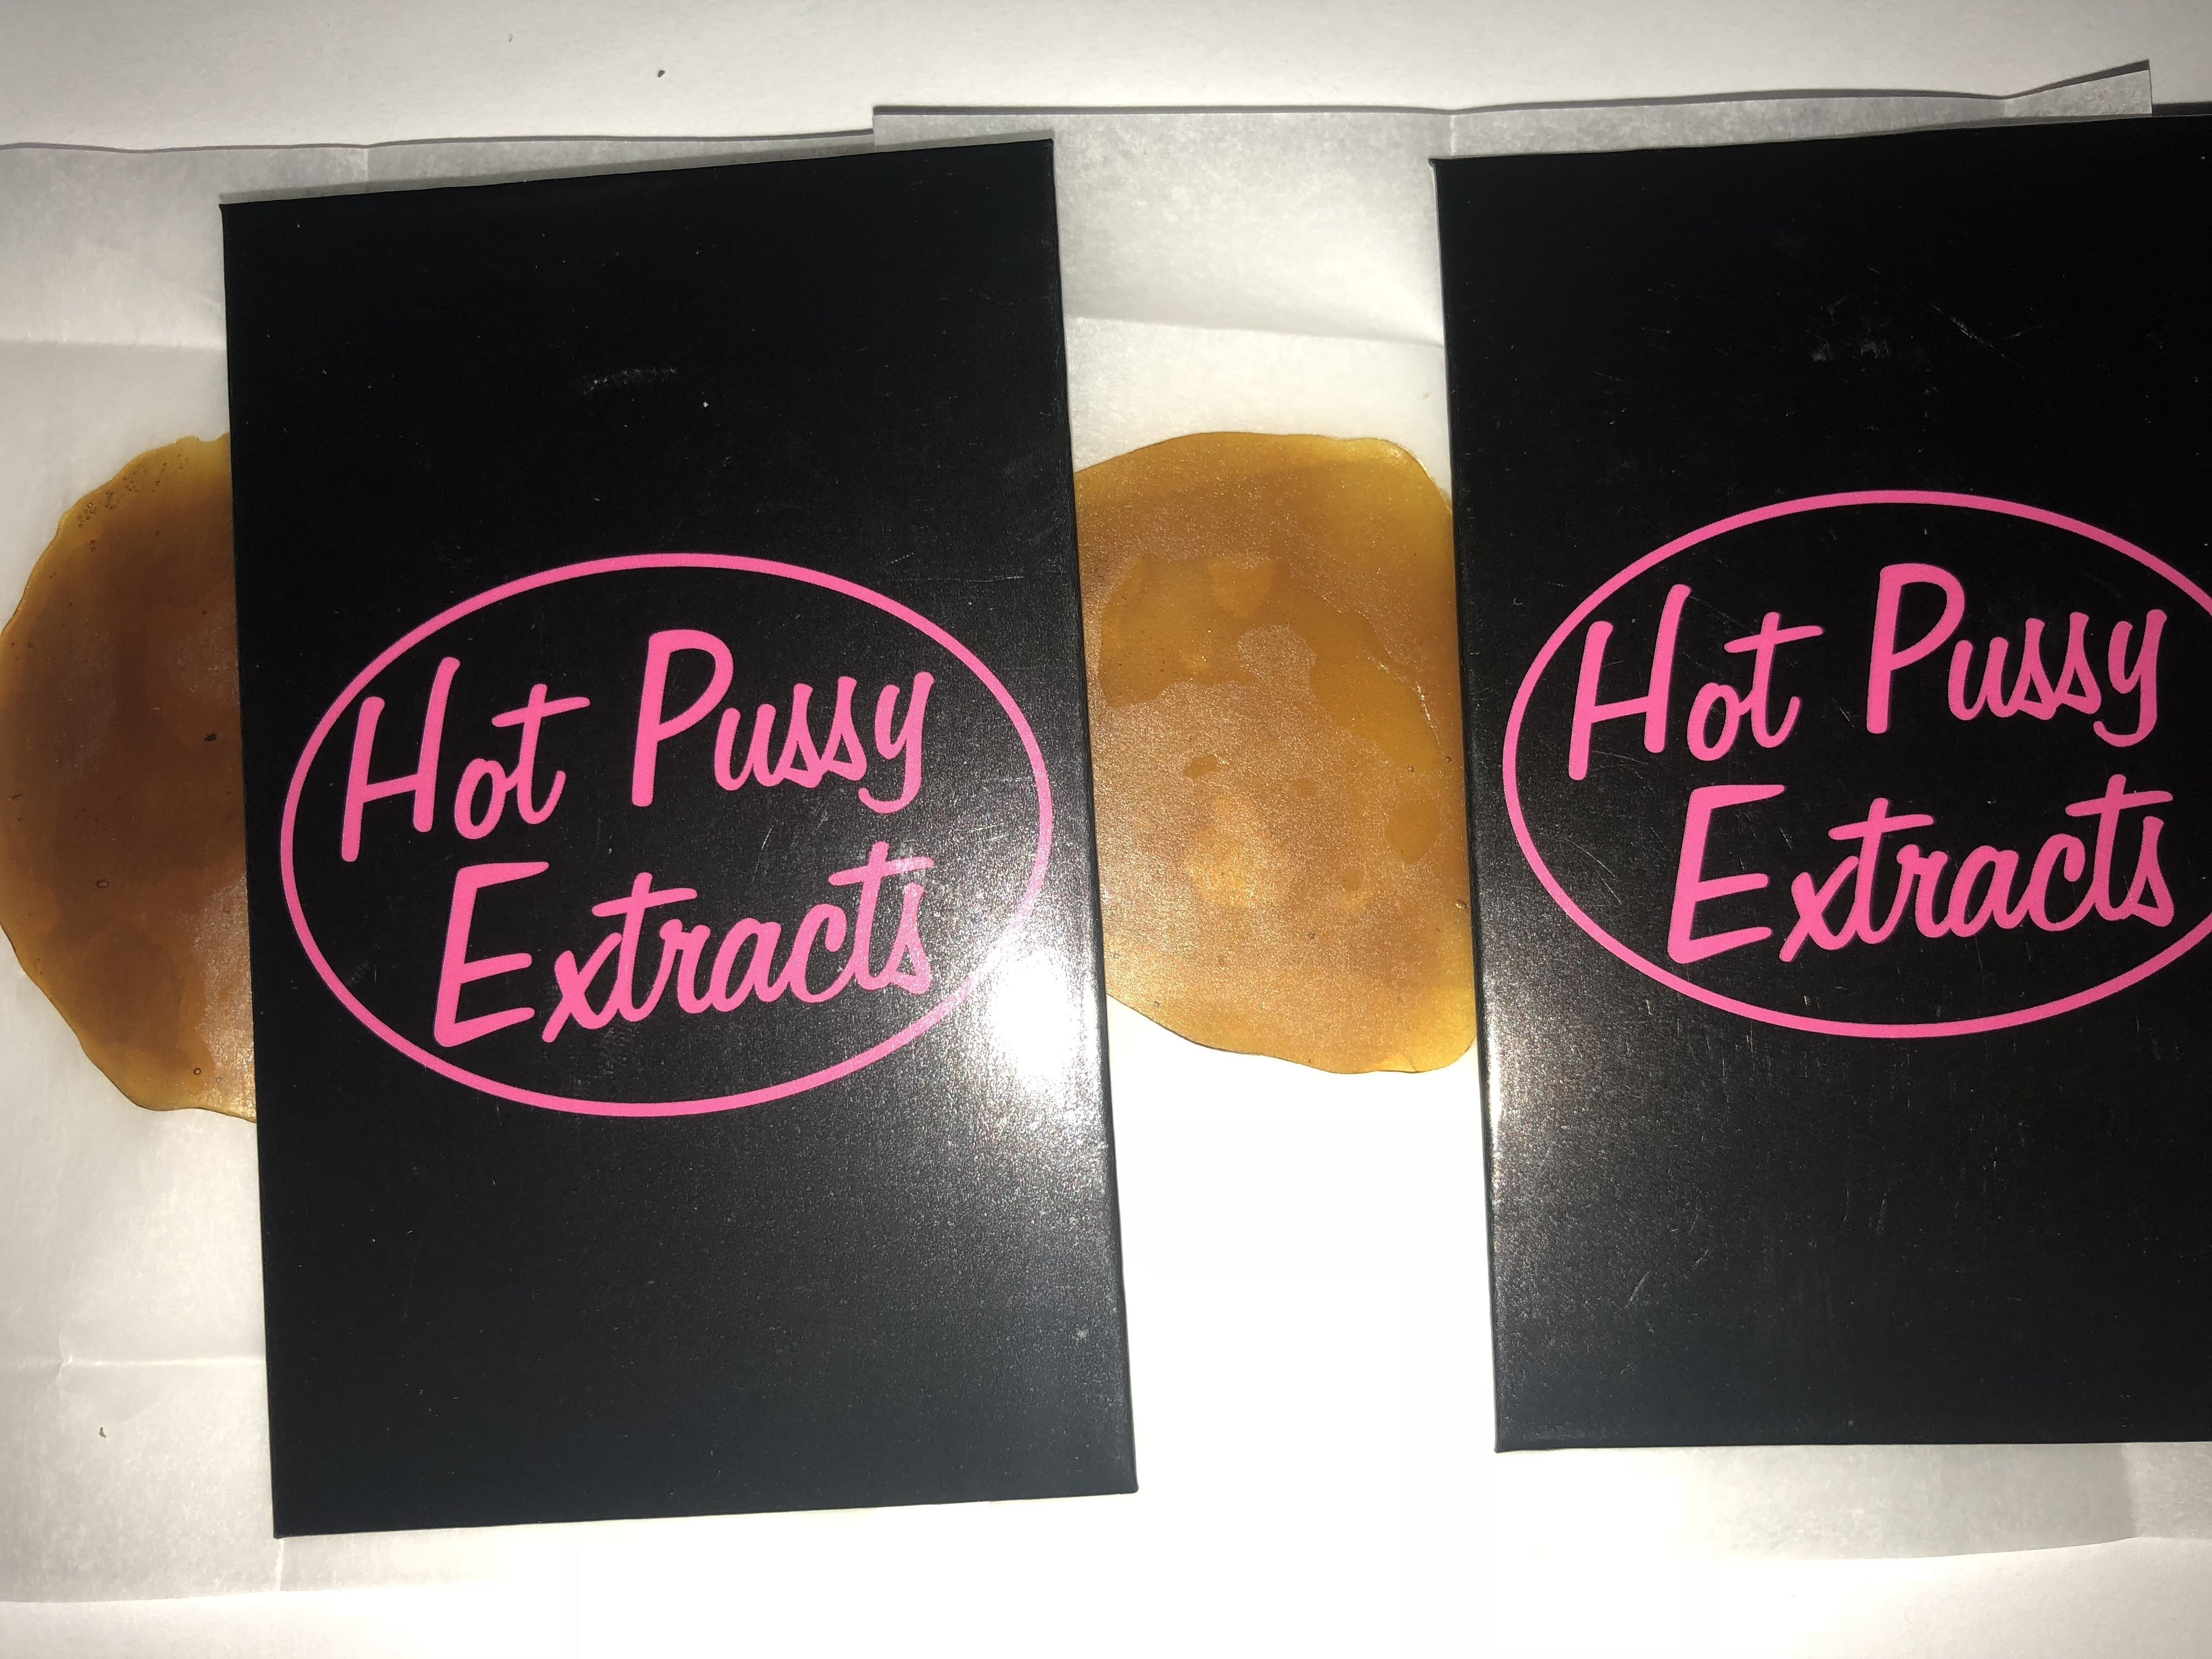 wax-hot-pussy-extracts